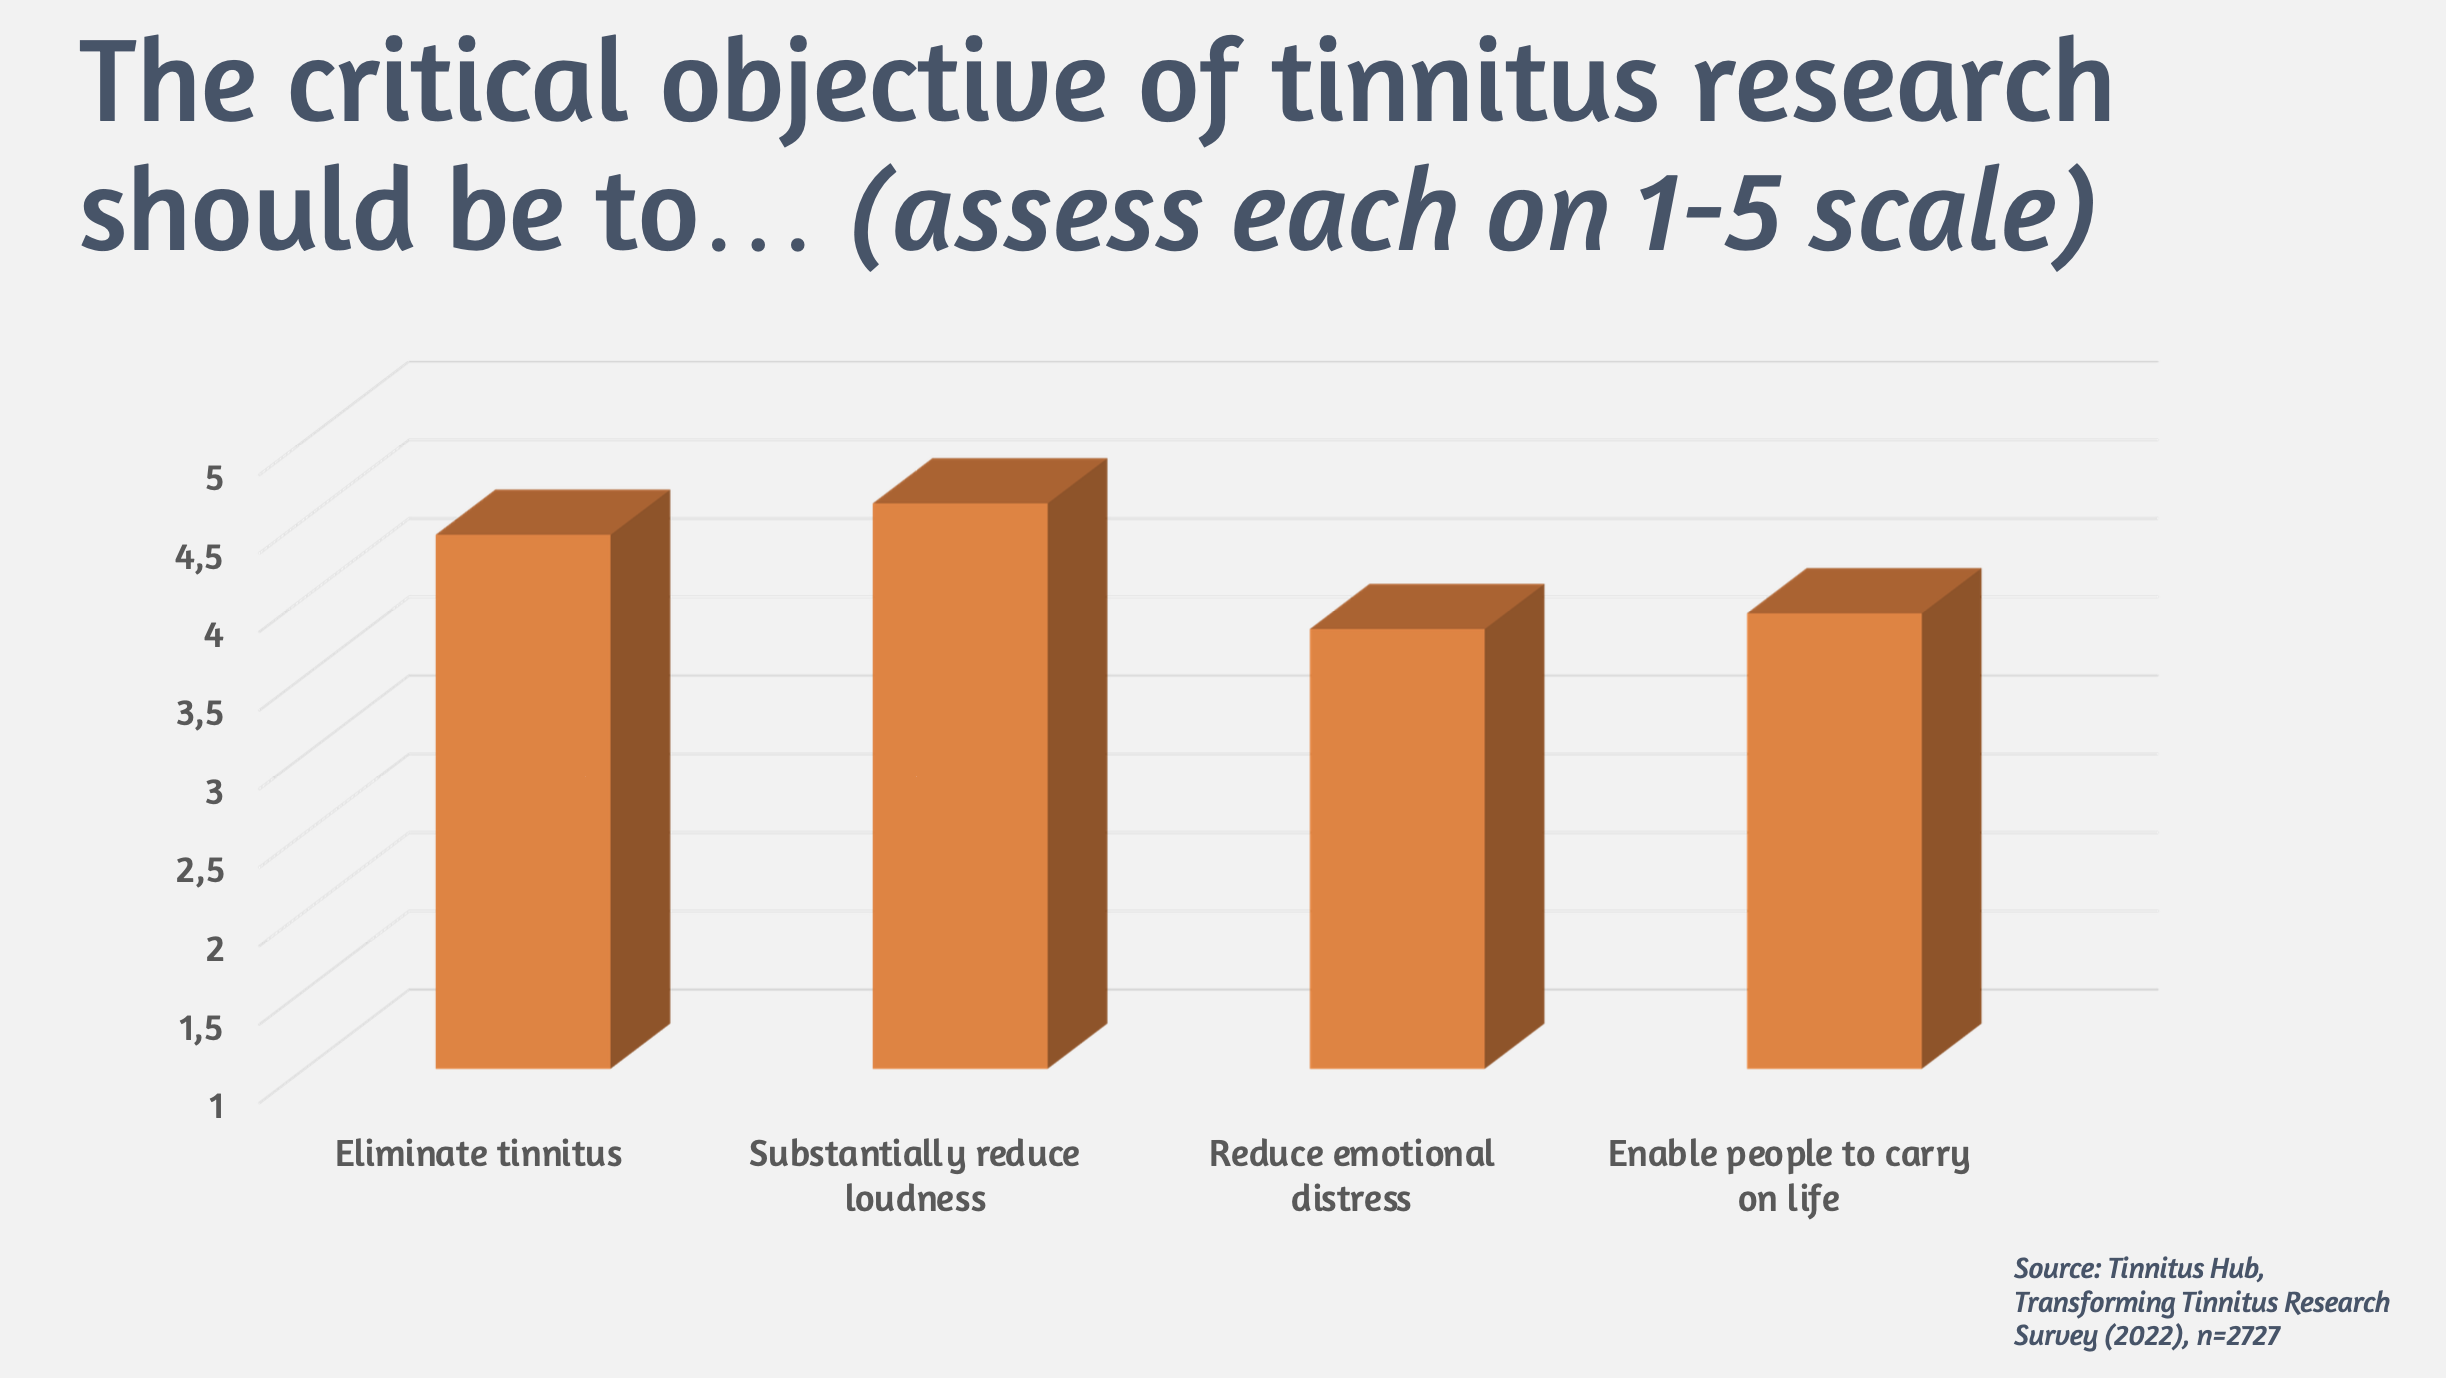 The Critical Objective of Tinnitus Research Should Be...